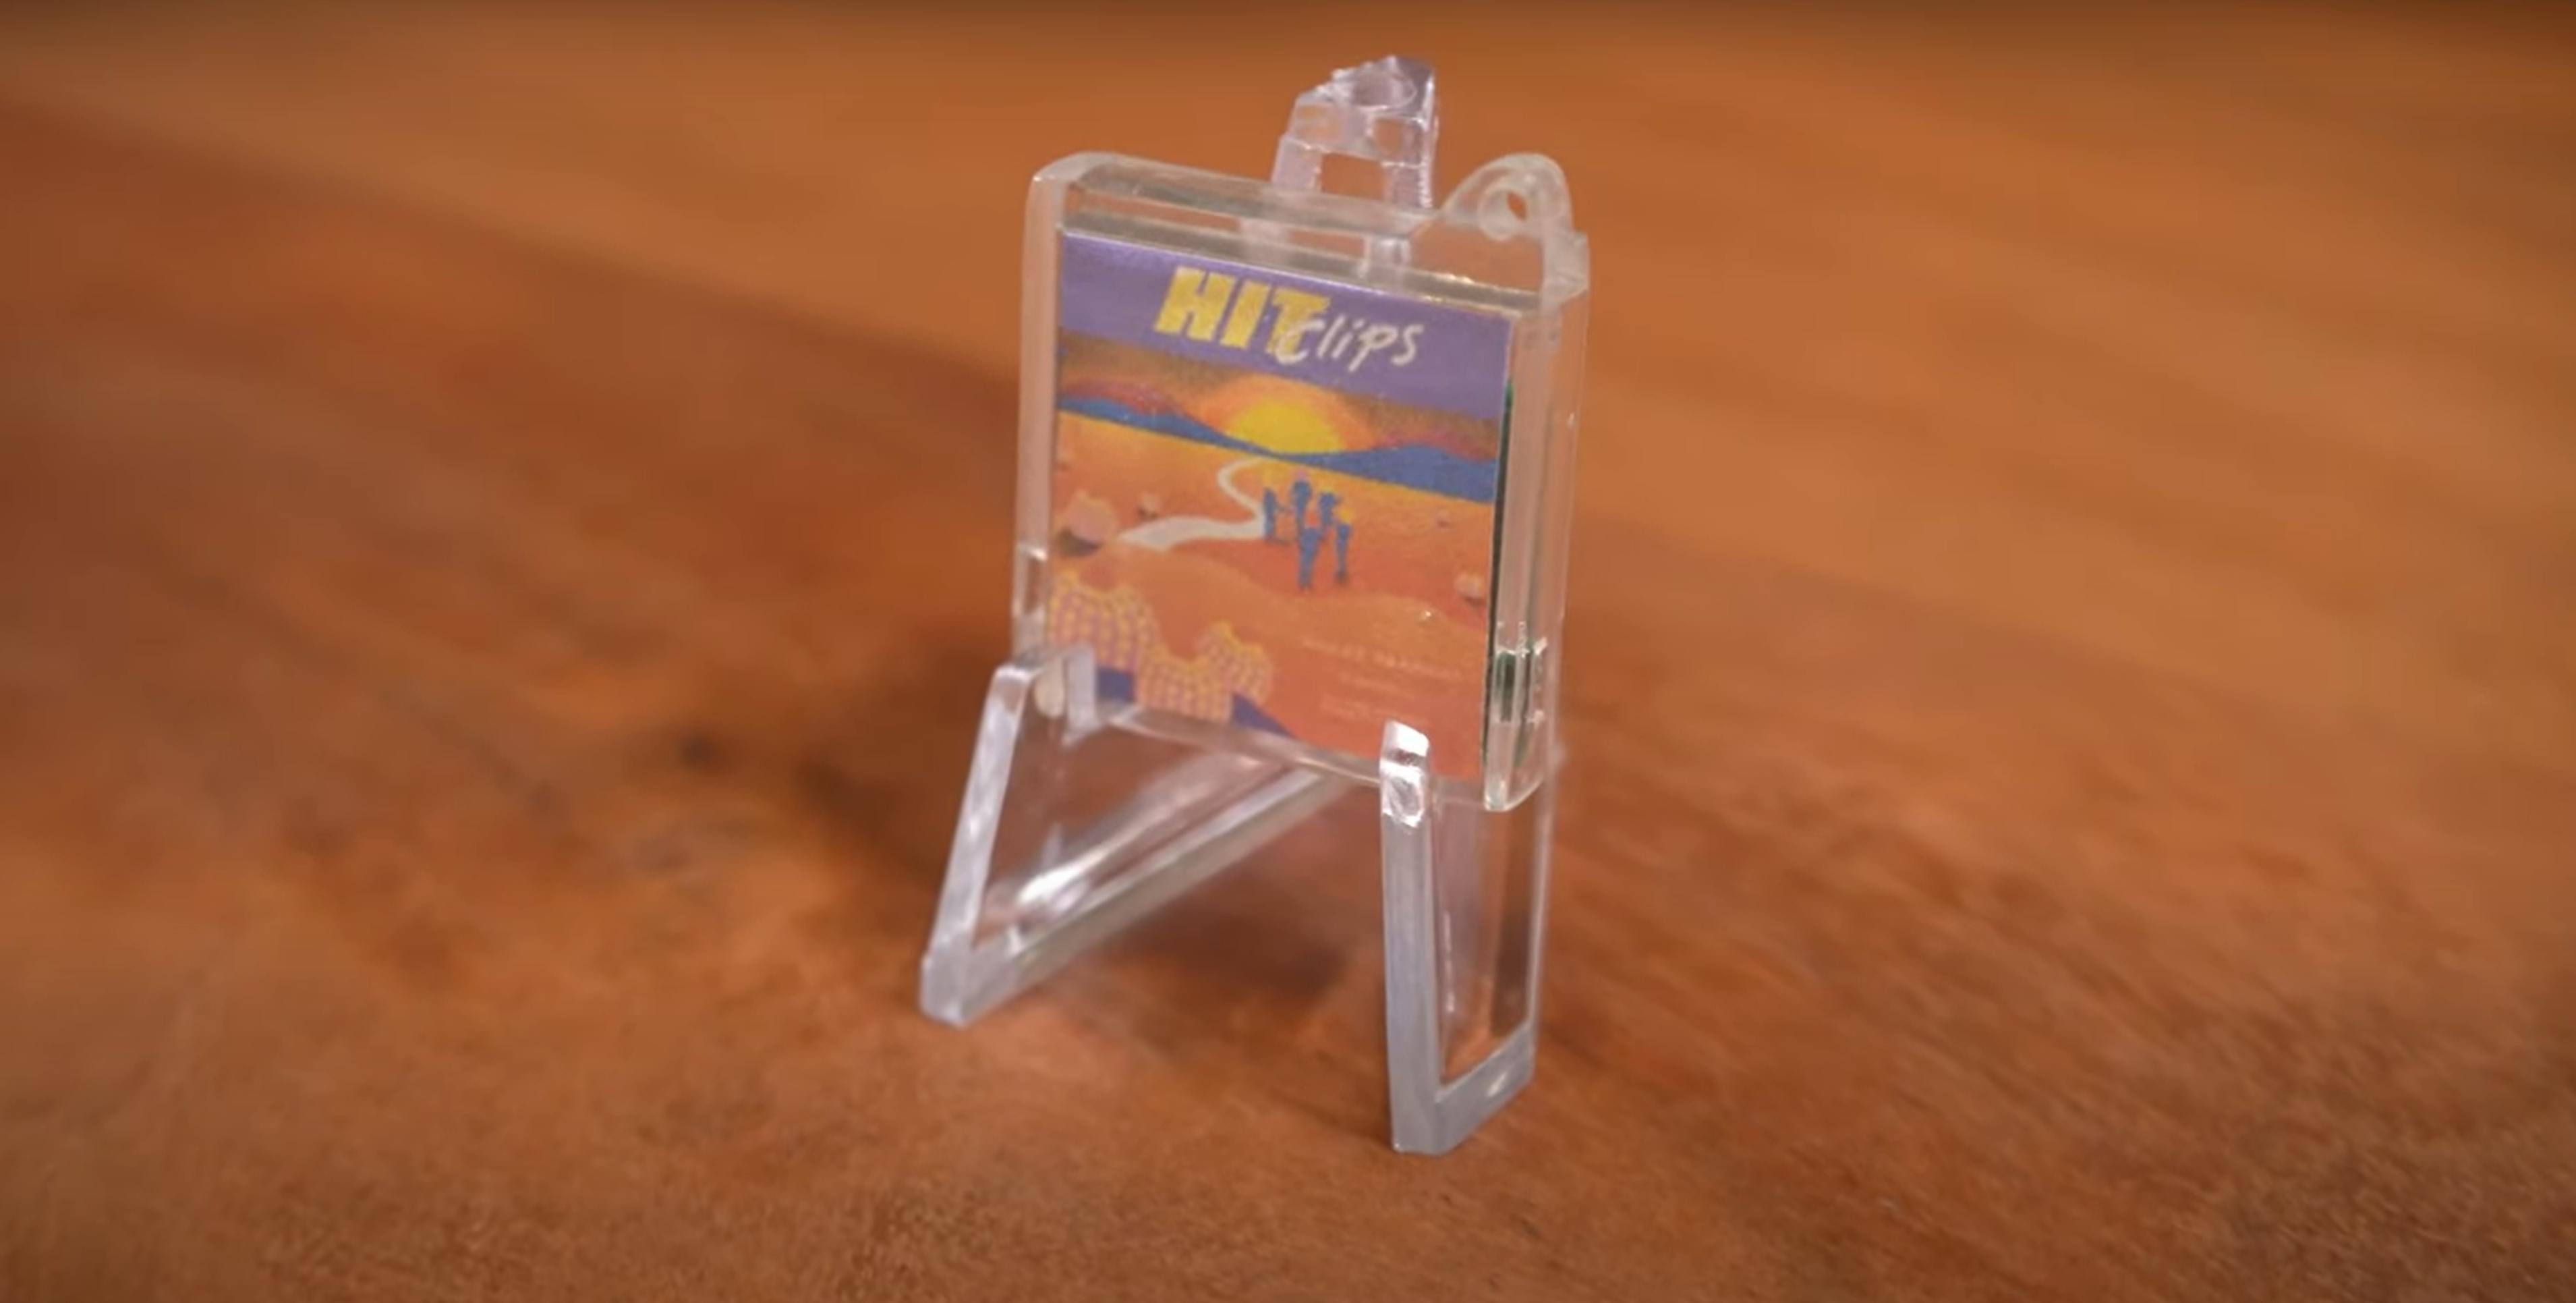 This Powerful But Tiny Arm Chip Lets You Get to Grips with Your Old,  Favorite HitClips! 